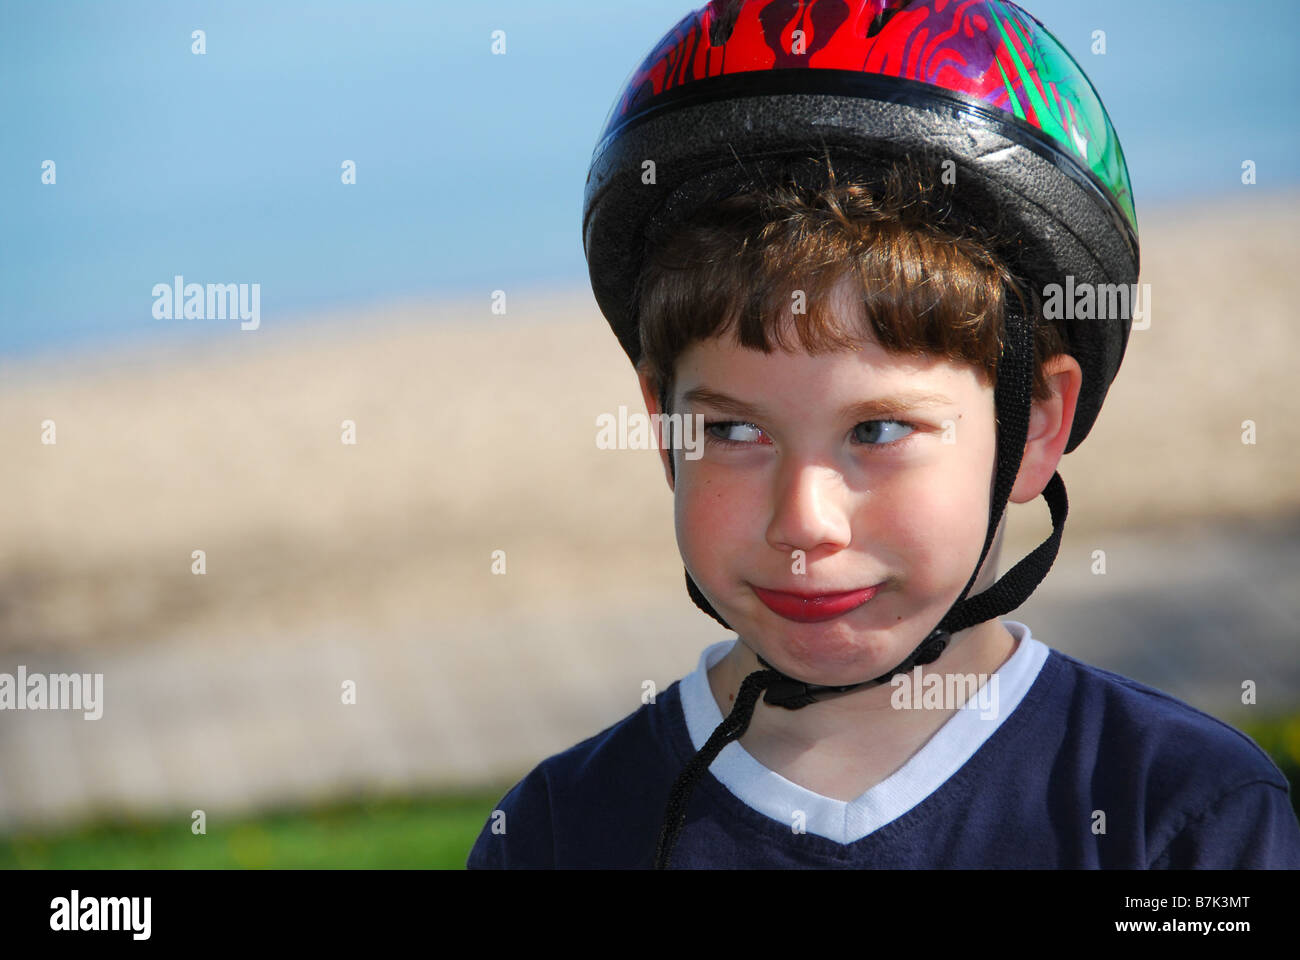 Portrait of a young boy in a bicycle helmet Stock Photo